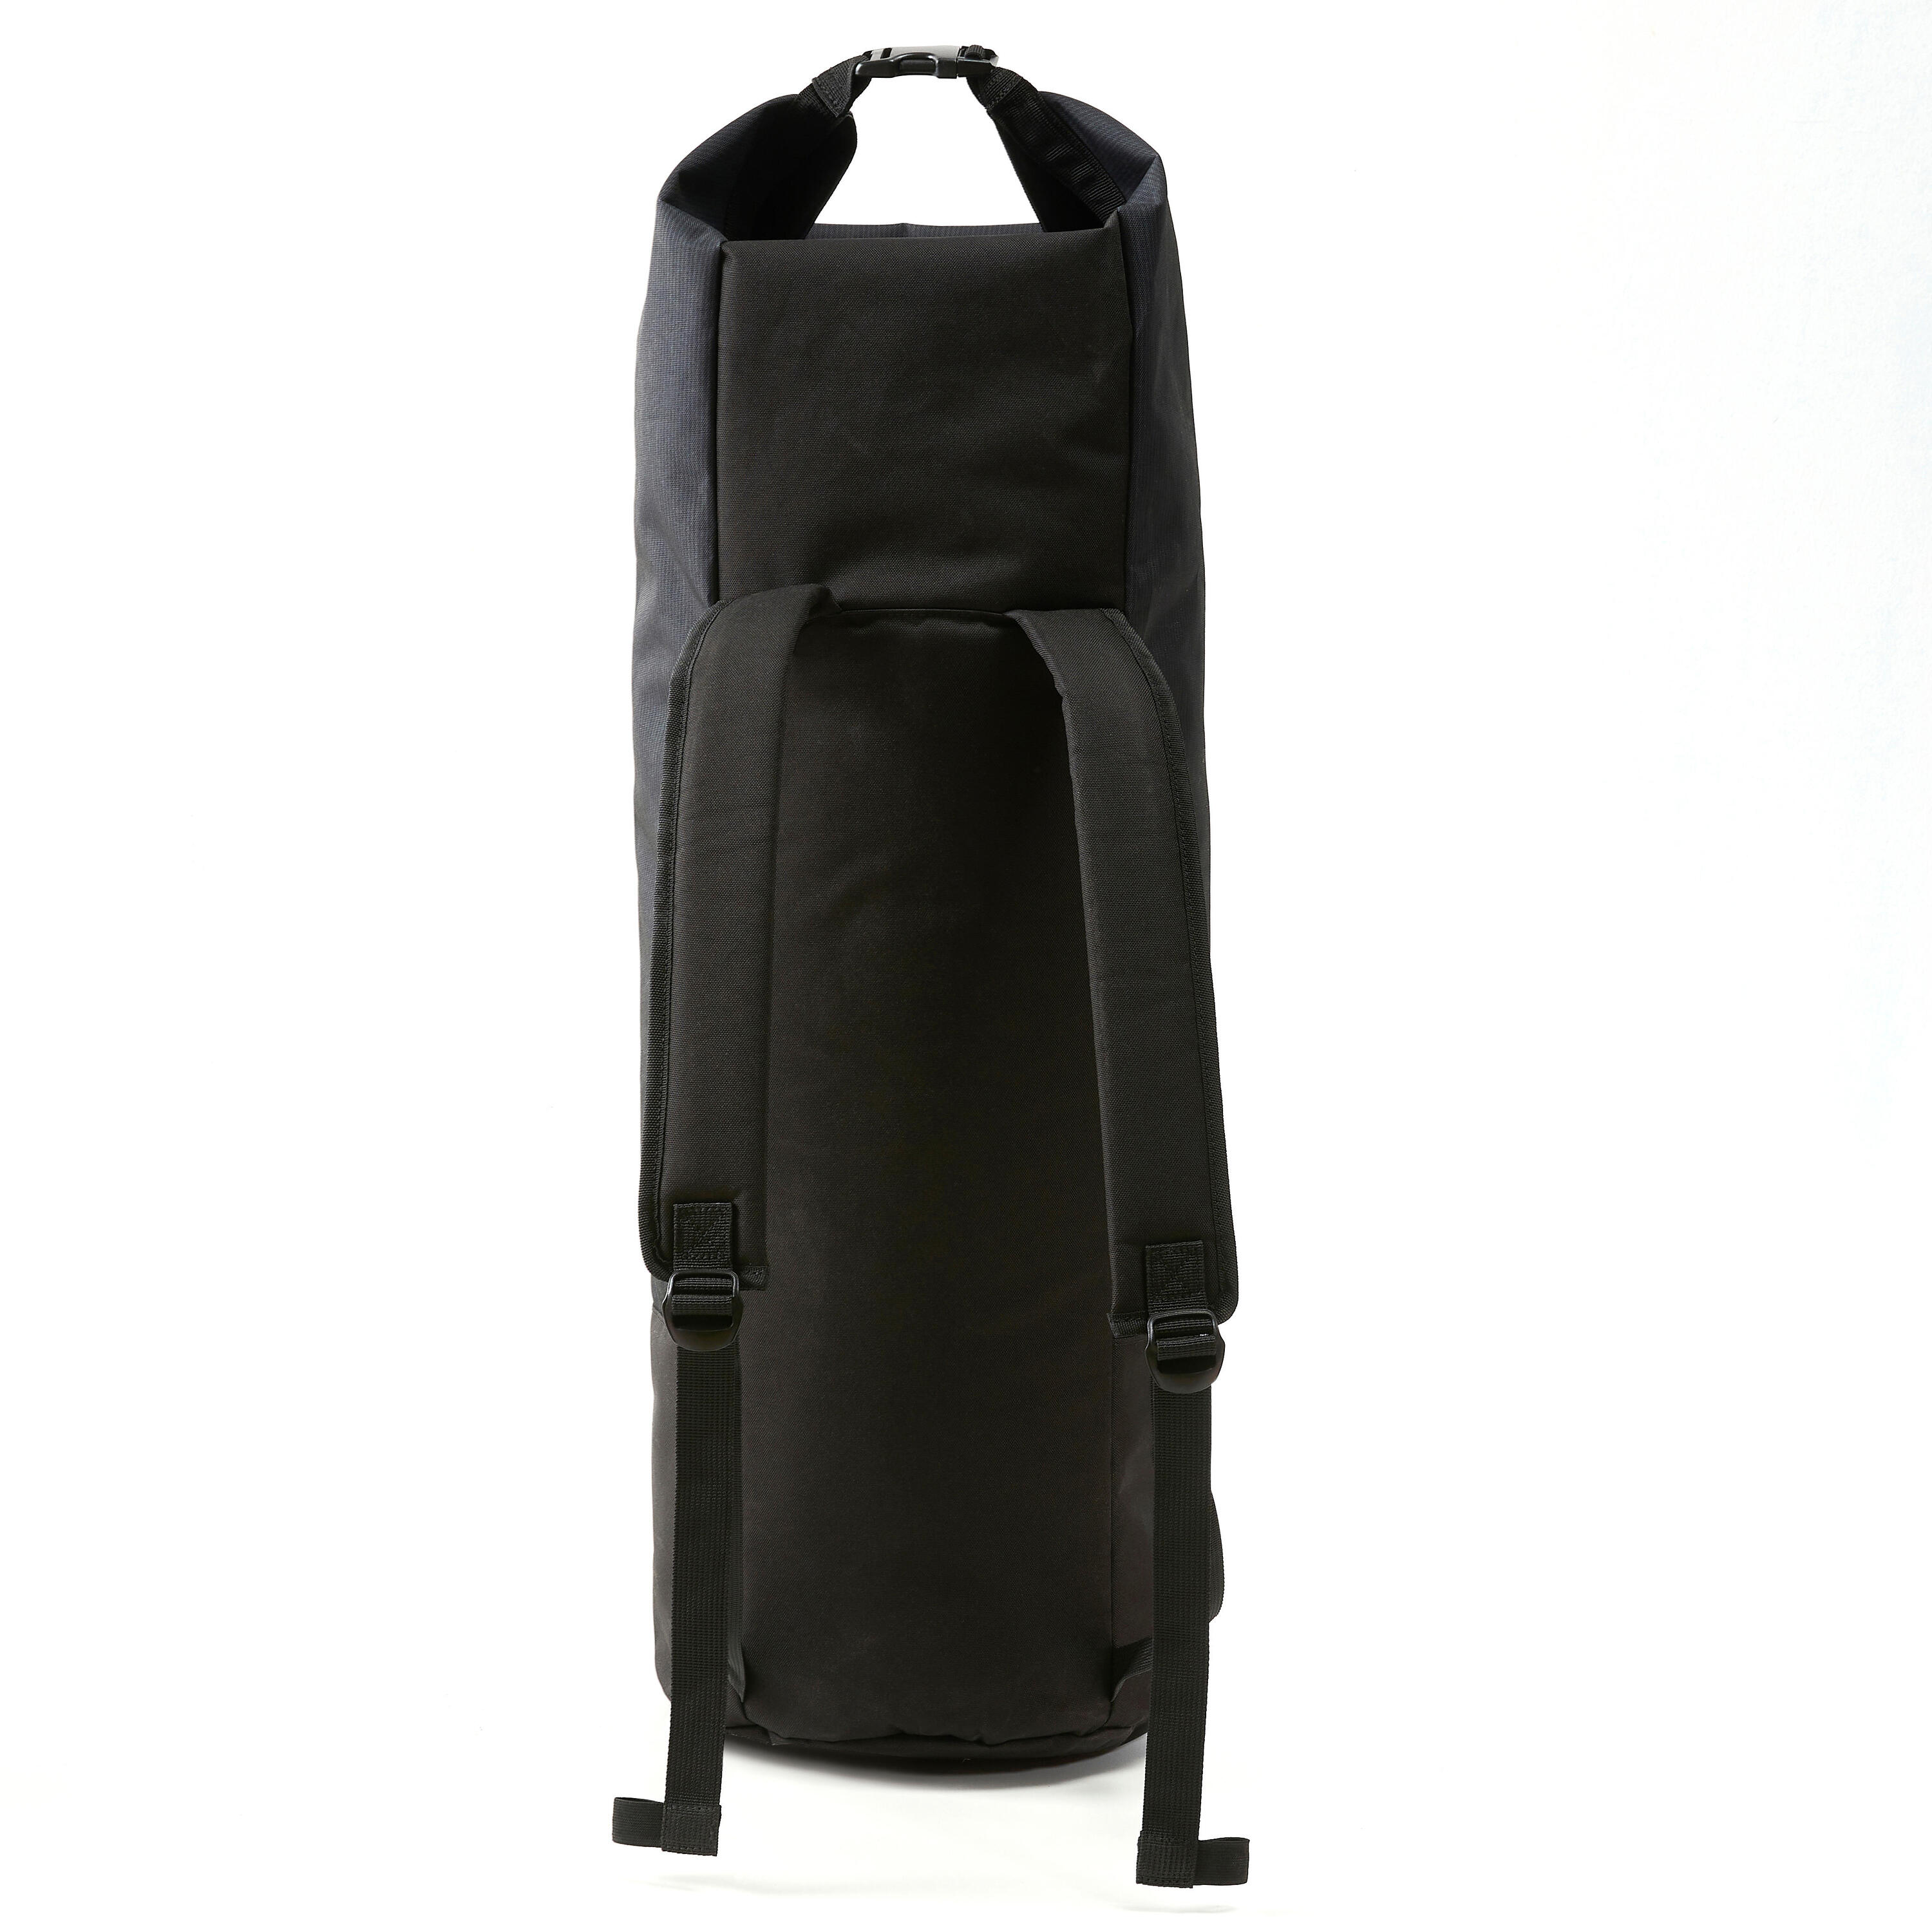 45L Backpack for Accessories - Black 5/6